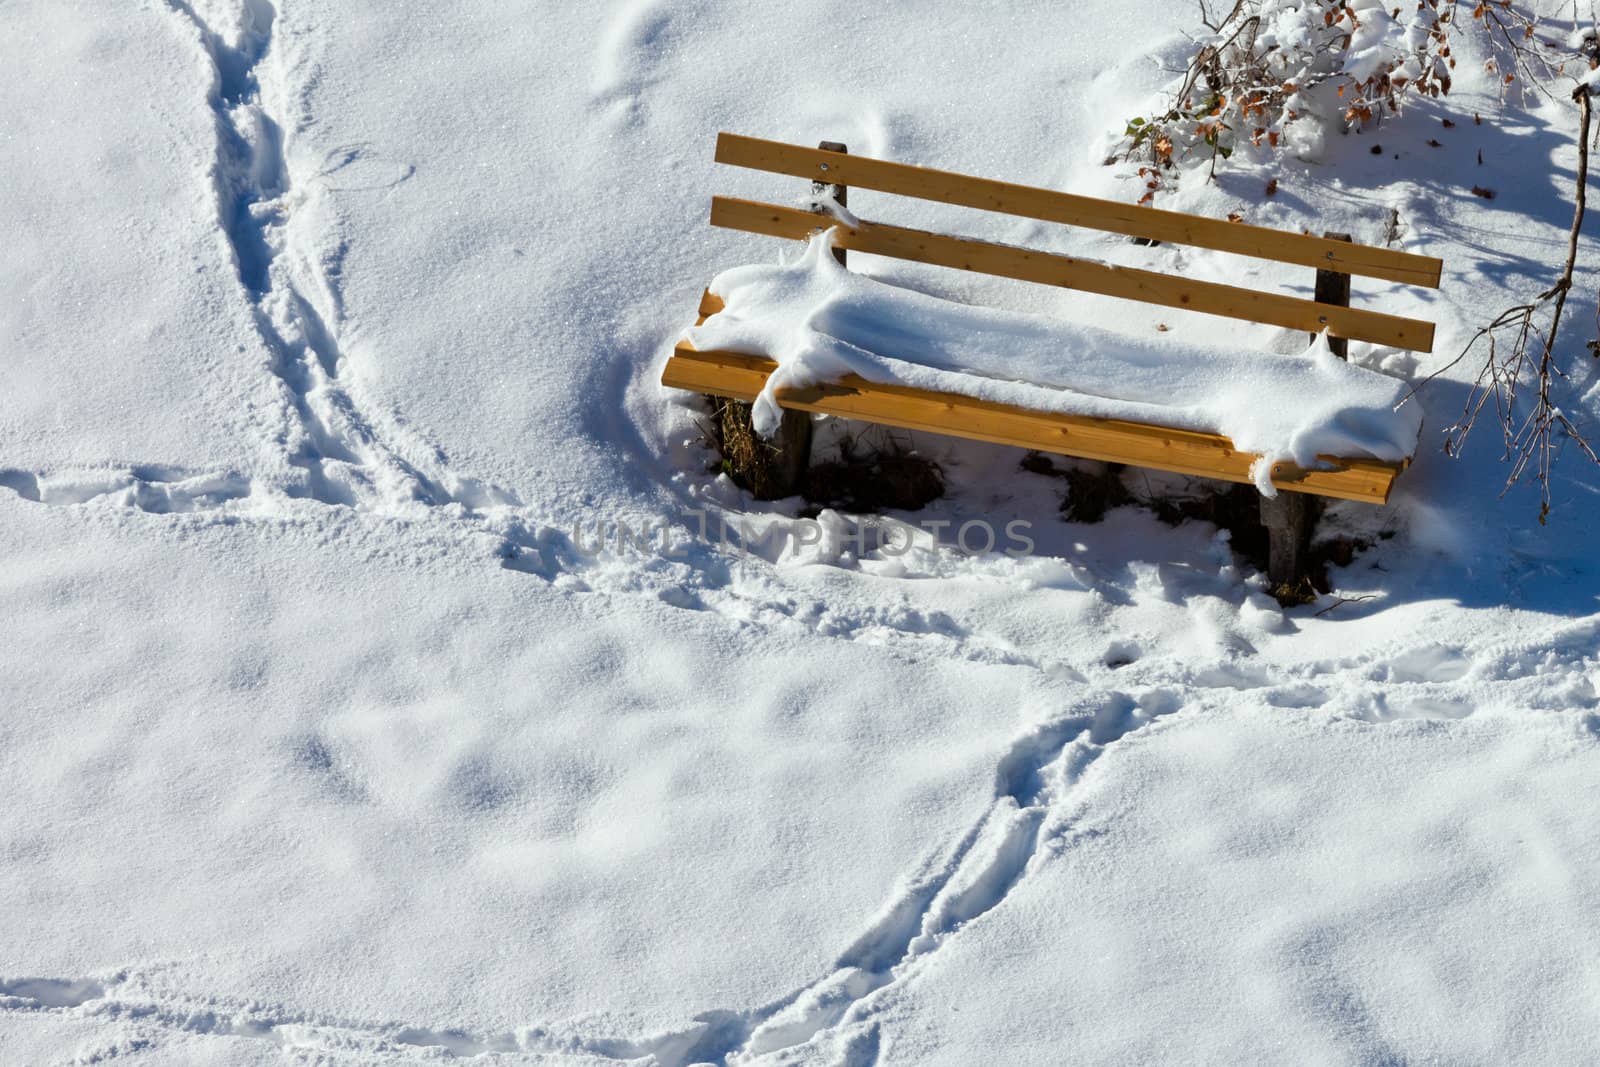 Top view of snow covered wooden park bench with human foot print tracks in freshly fallen snow around it.